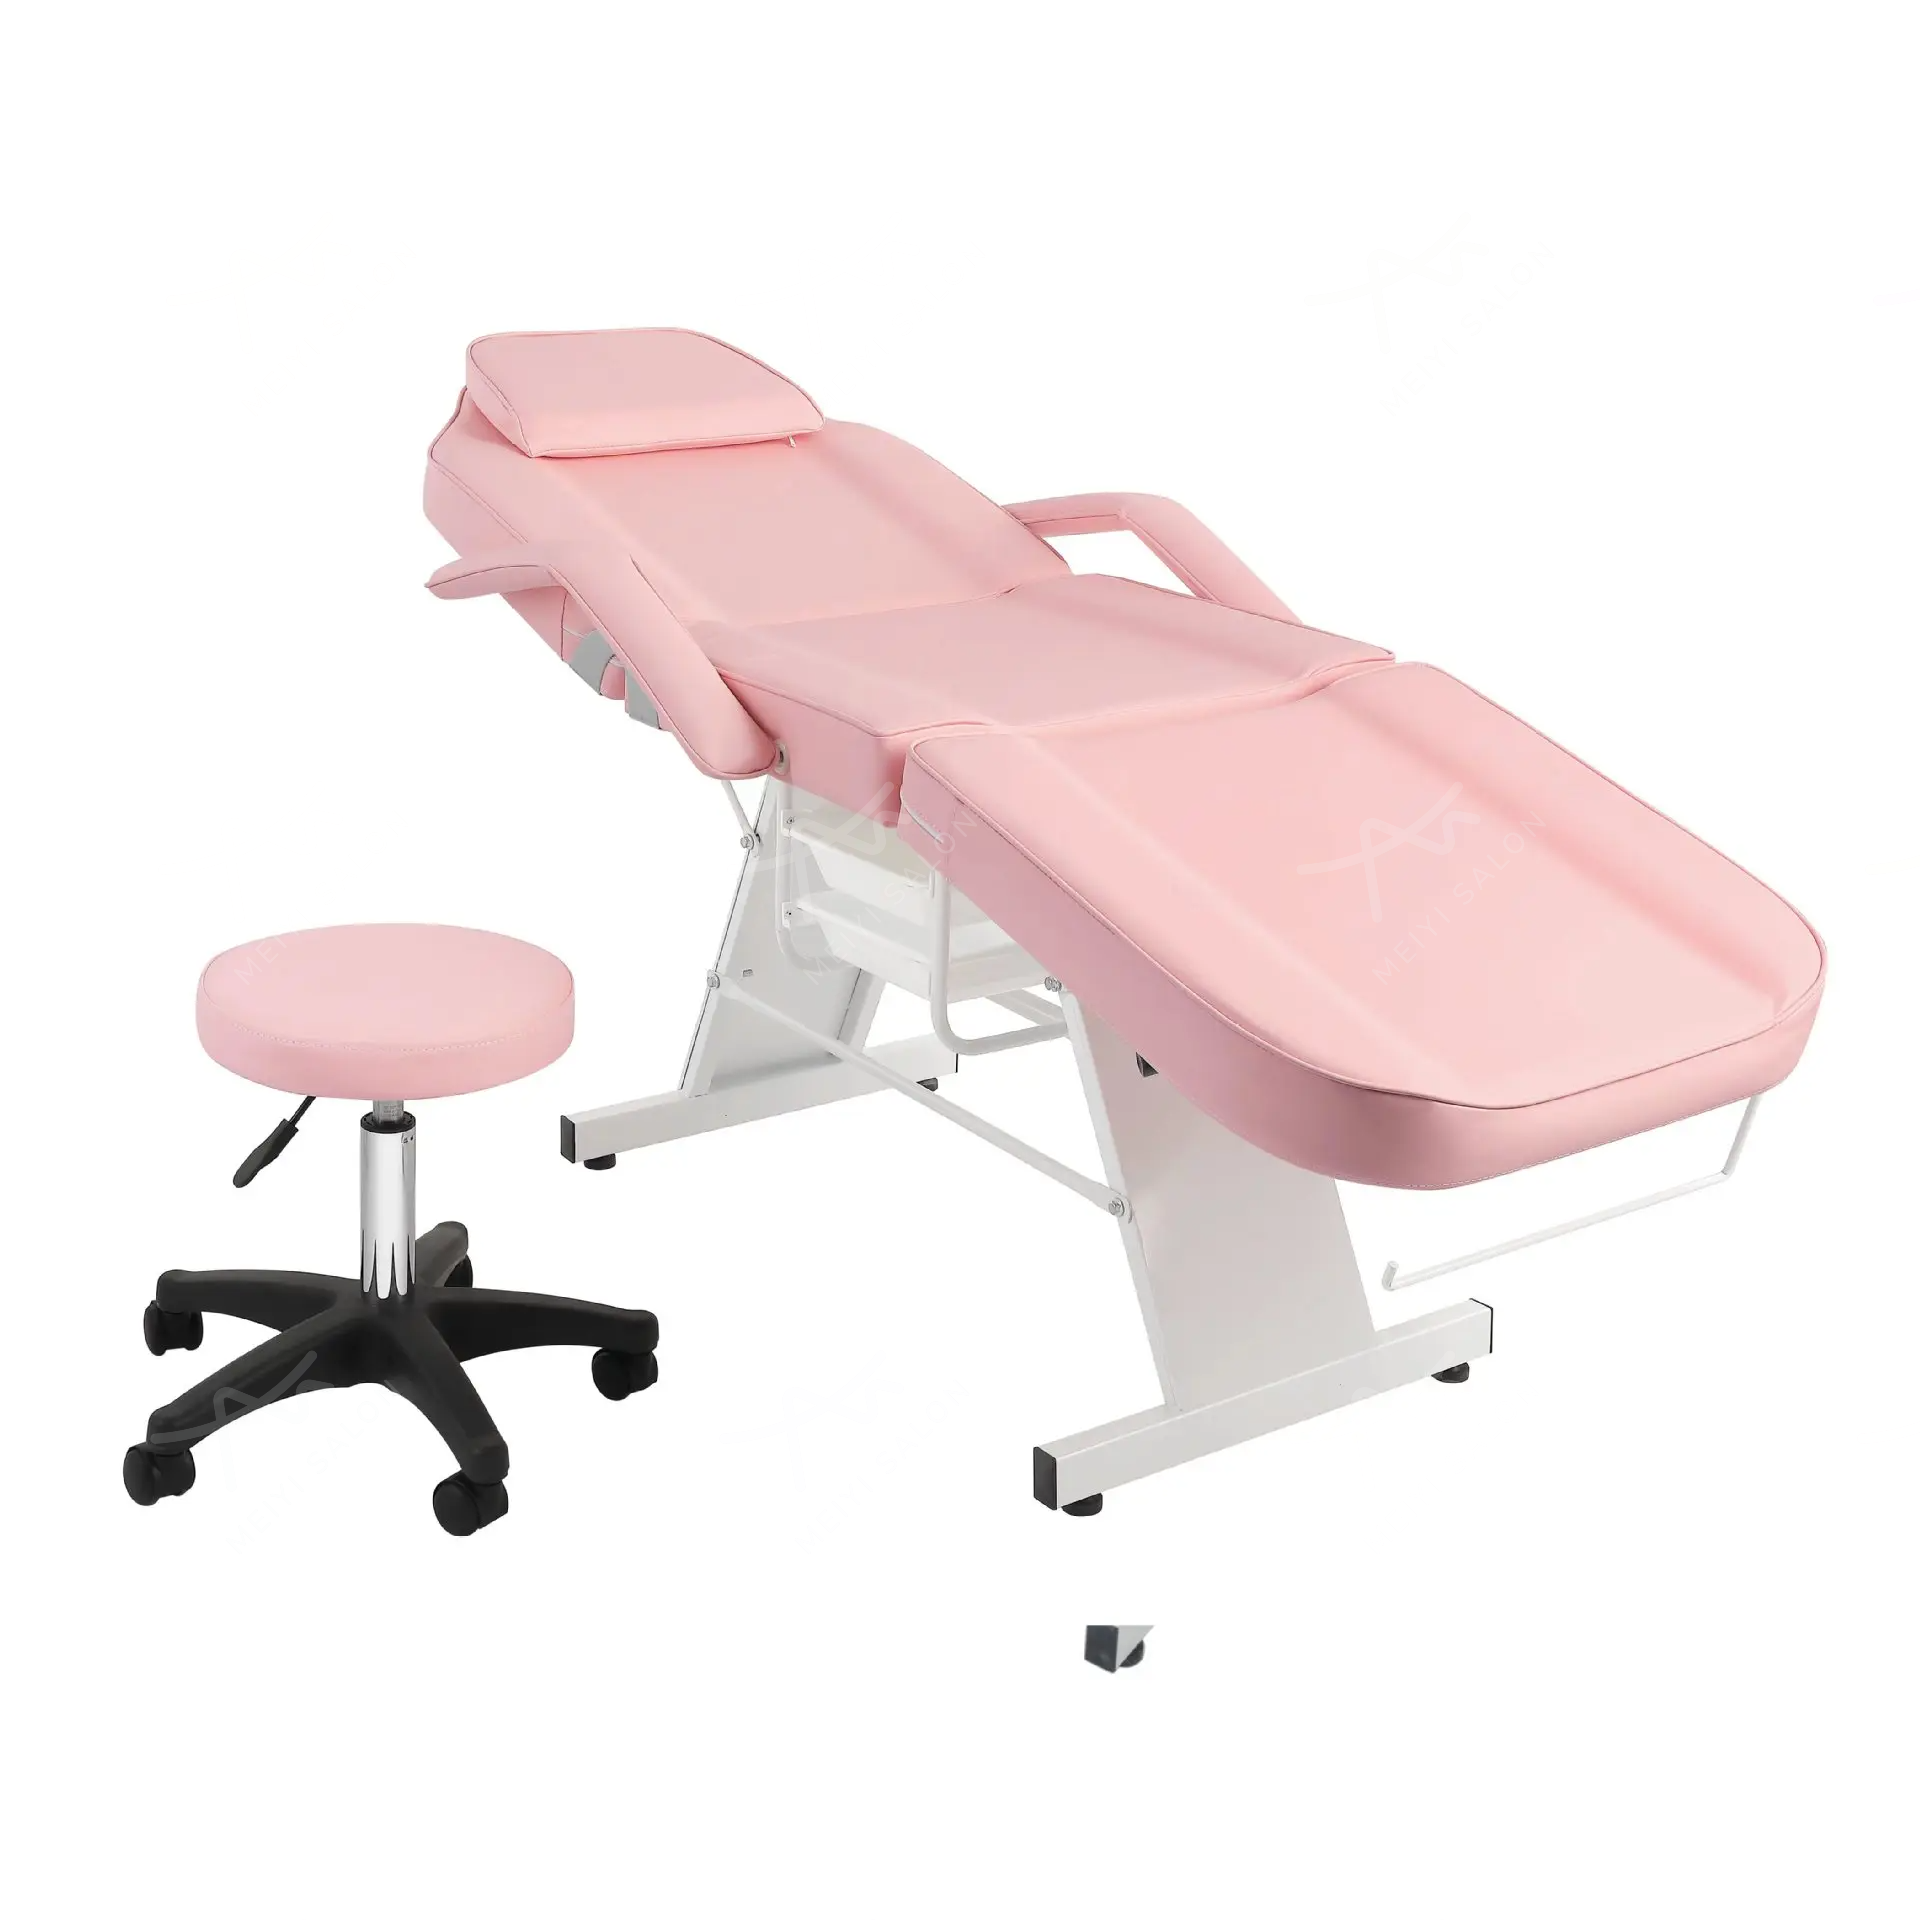 Massage Therapy Table 6